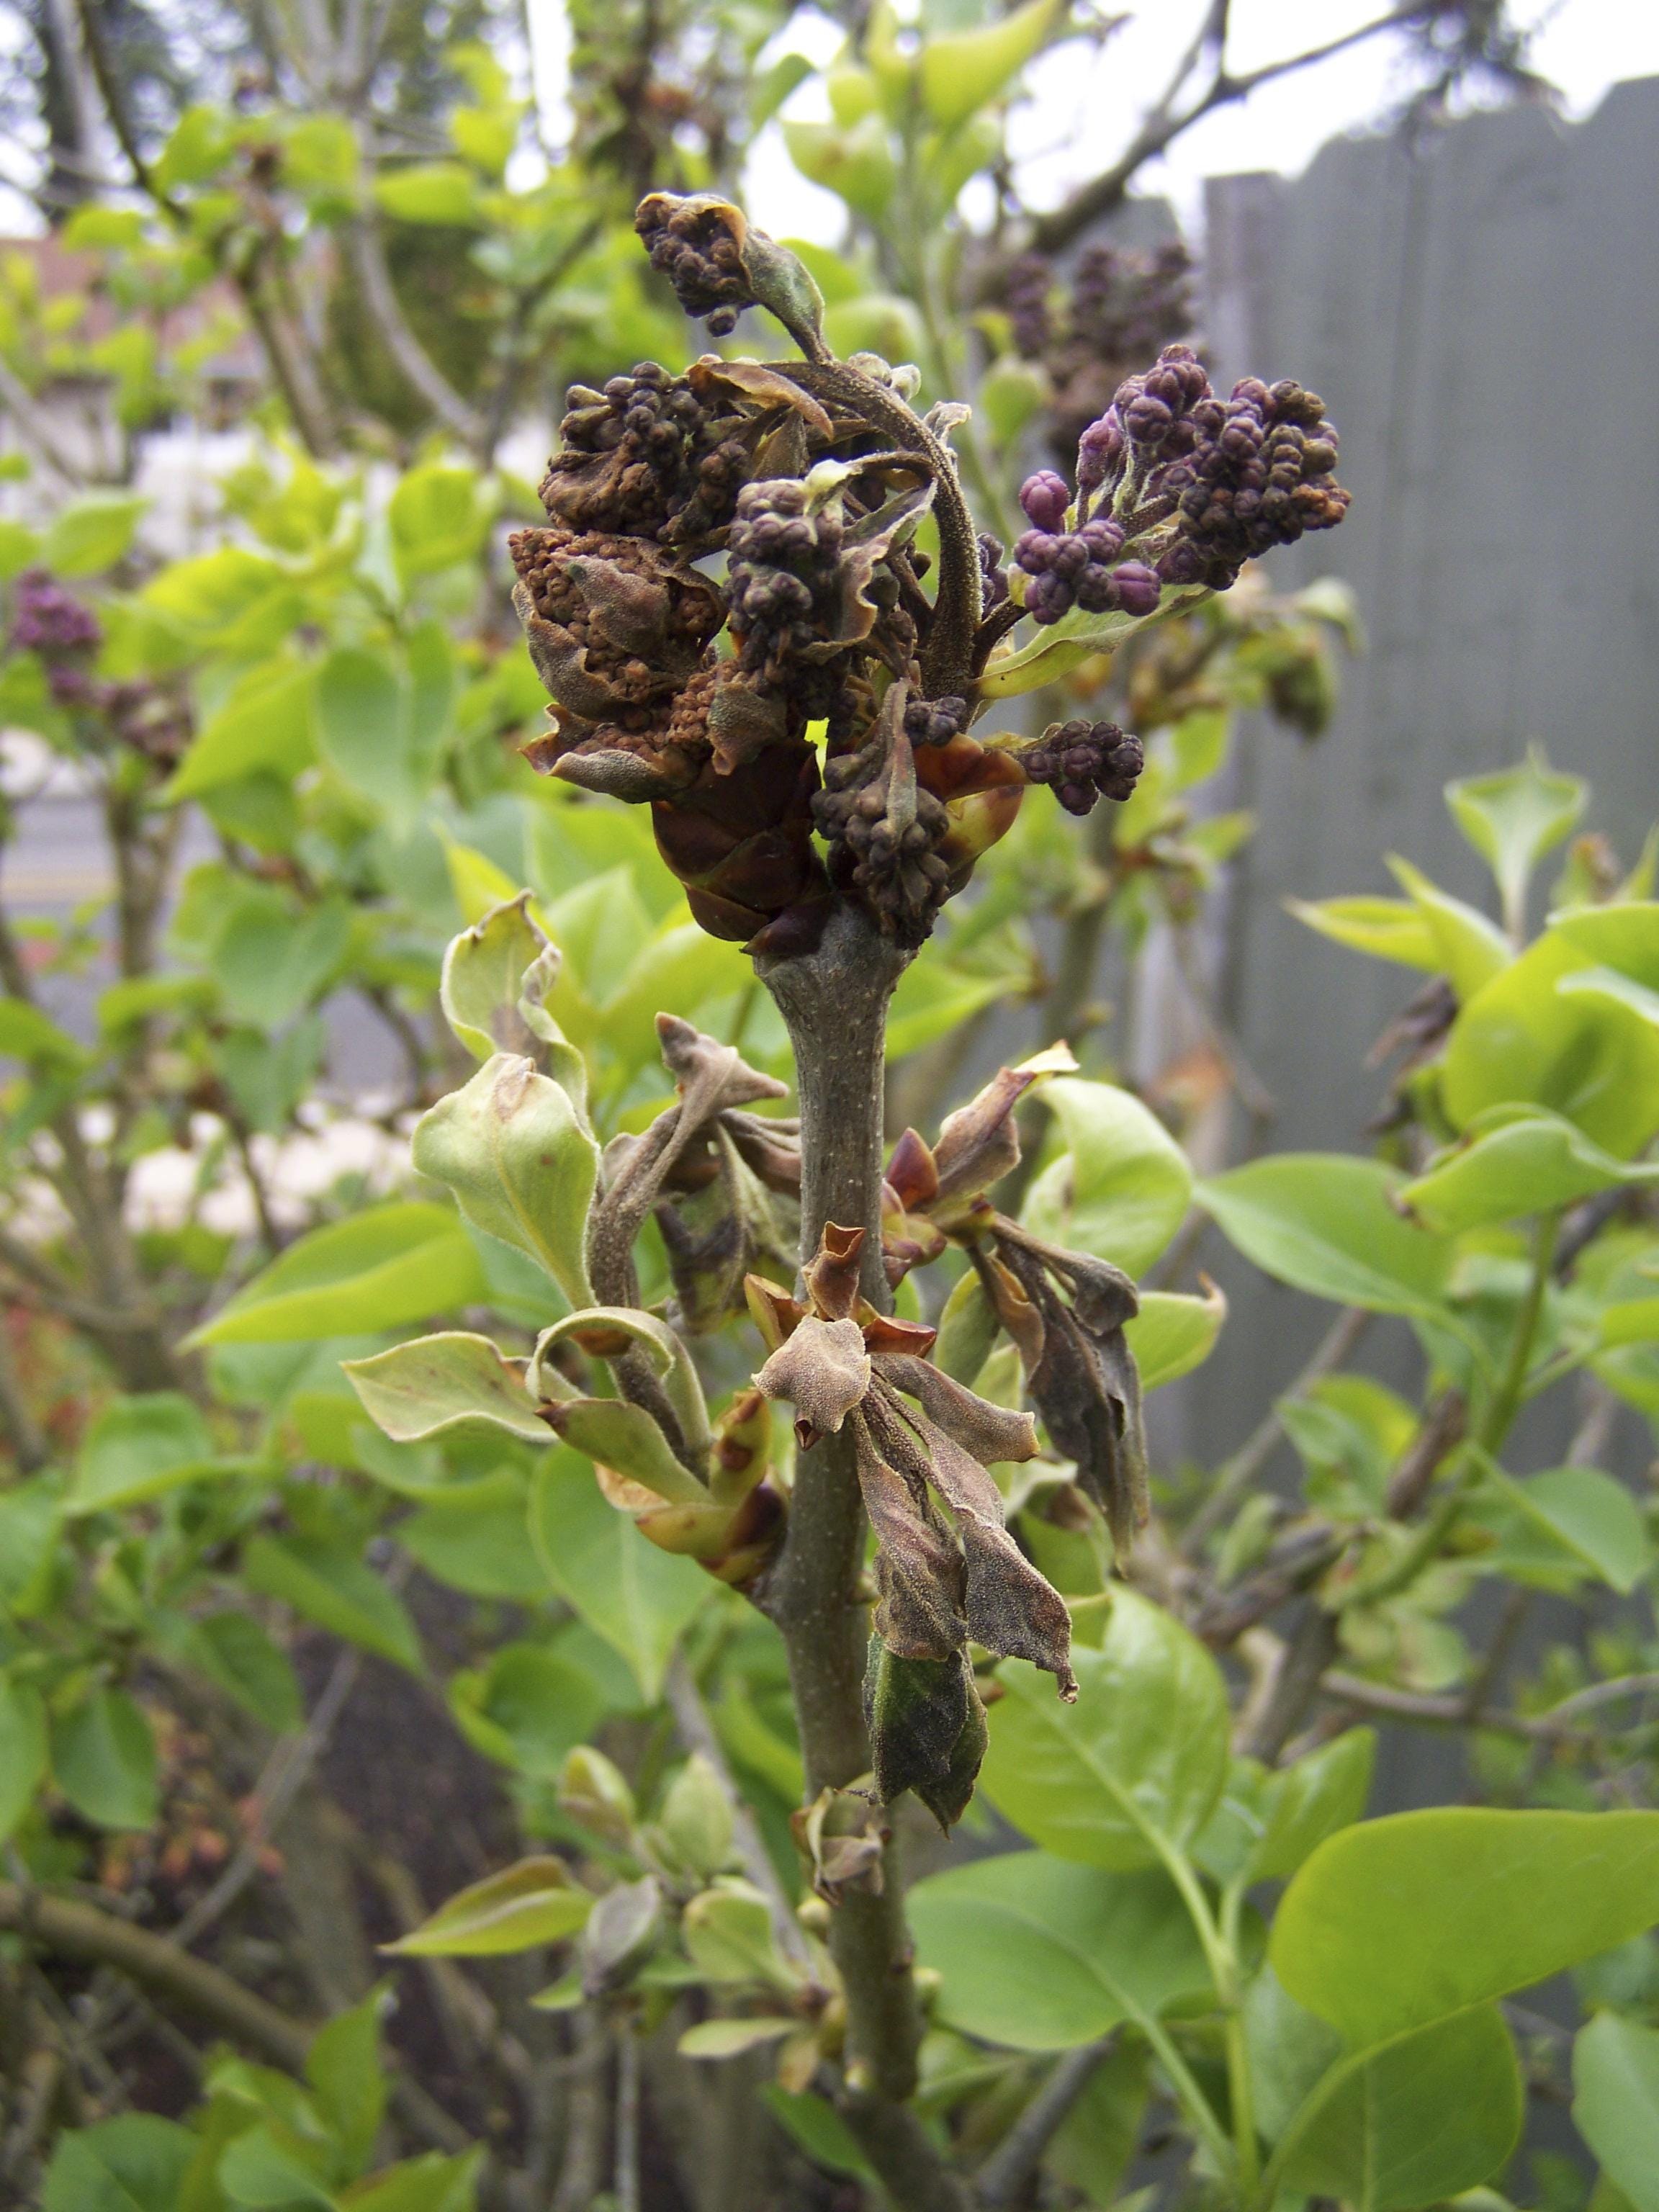 Lilacs suffer in wet spring, with blackened blooms